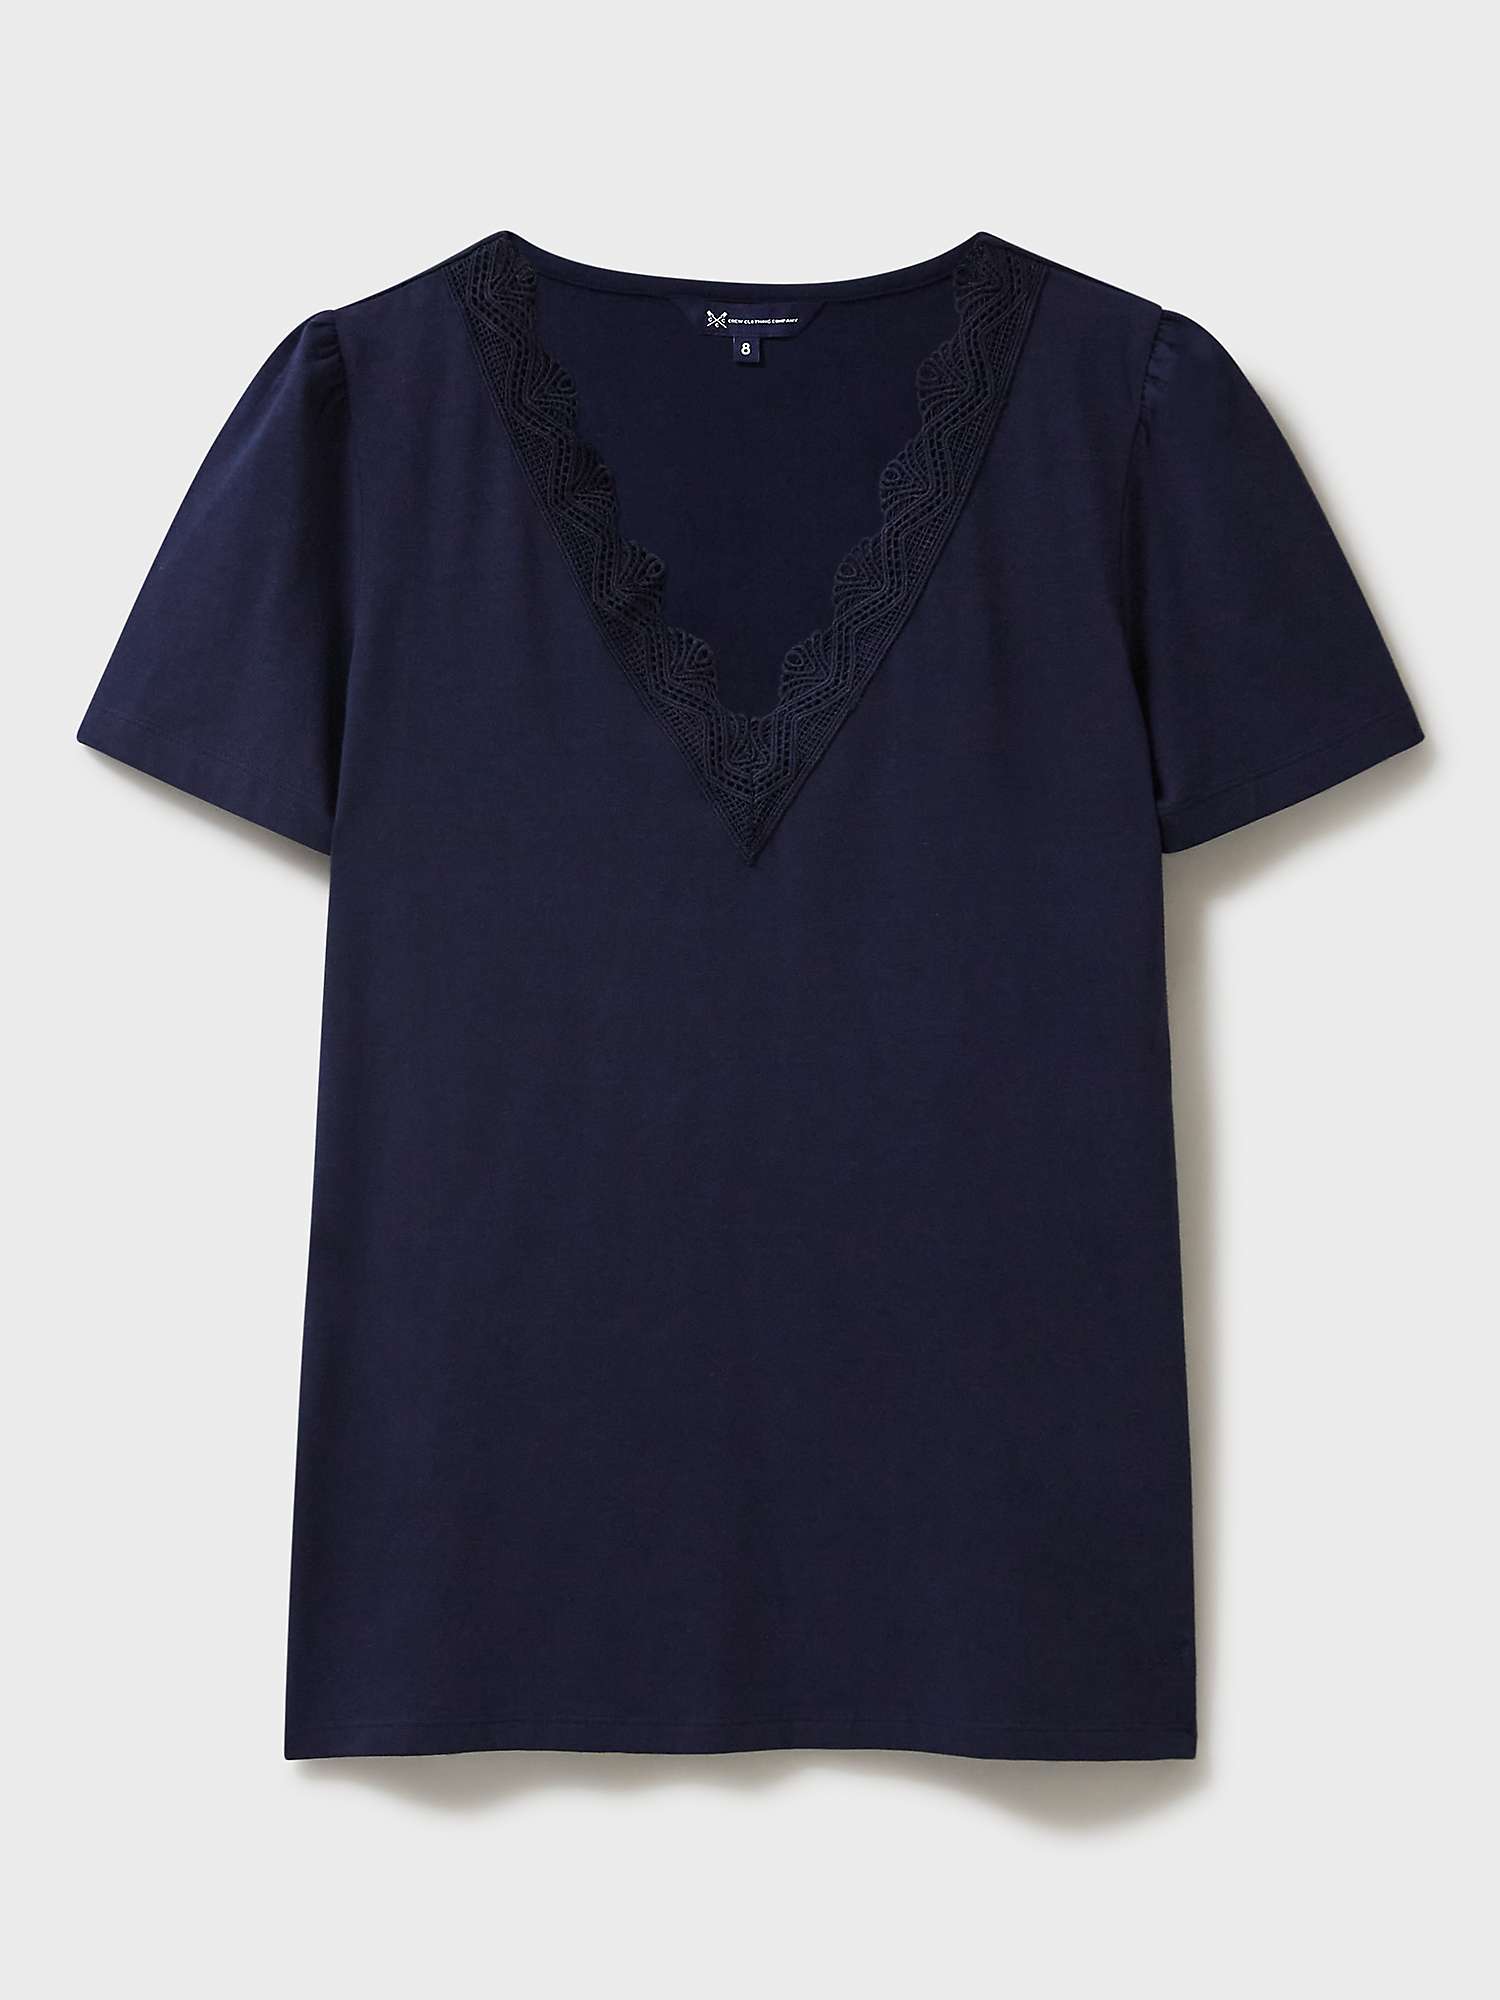 Buy Crew Clothing Lace Neck Short Sleeve T-Shirt, Navy Online at johnlewis.com